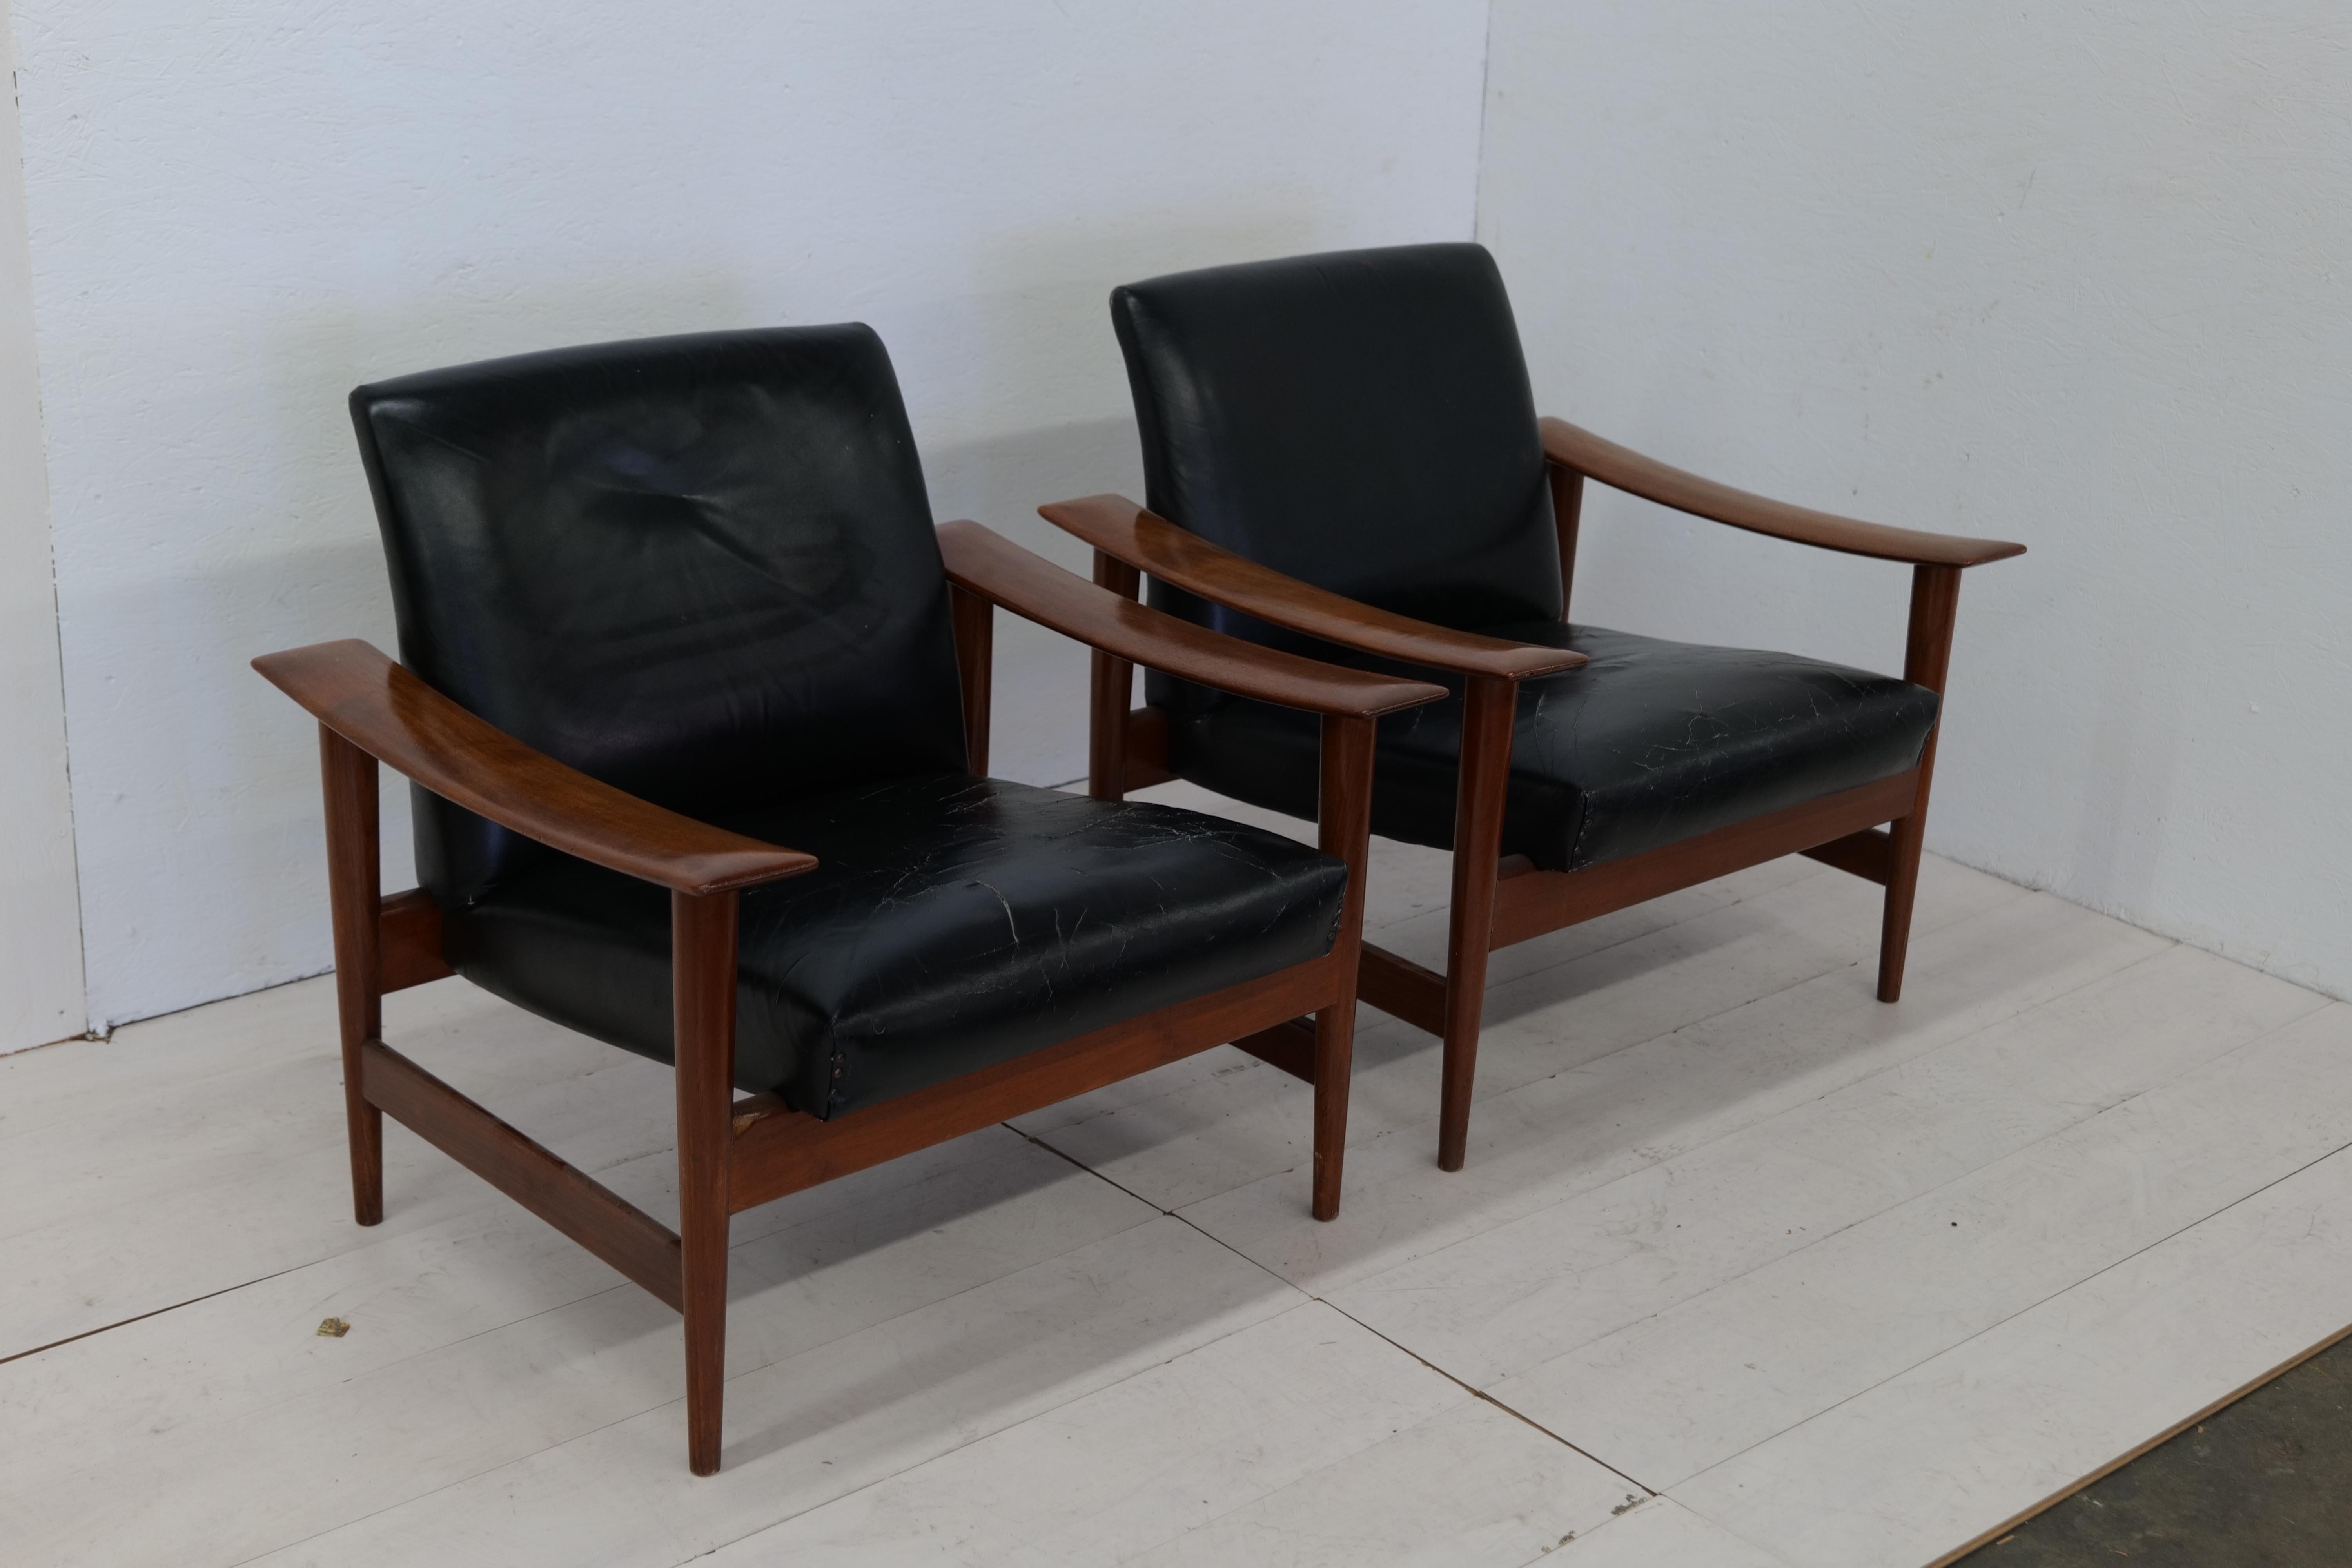 The midcentury Danish armchair crafted in the 1960s combines the warmth of walnut with the sophistication of leather. Its sleek design and clean lines showcase the iconic Danish style that prioritizes both comfort and aesthetics. The rich walnut